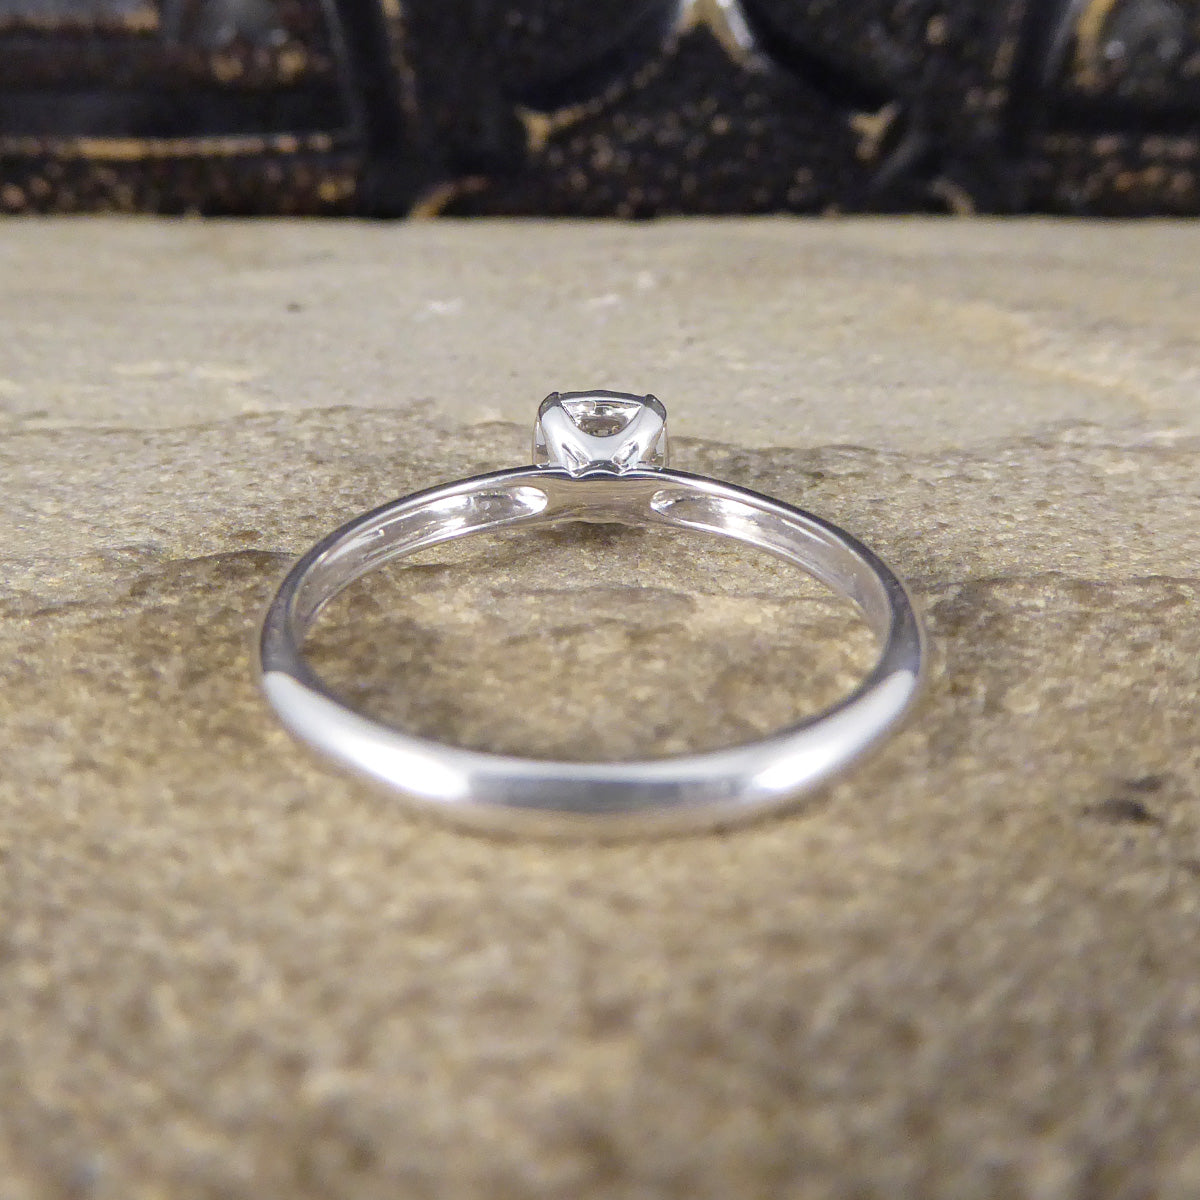 Diamond Solitaire Ring with a Cushion Cut Illusion in White Gold